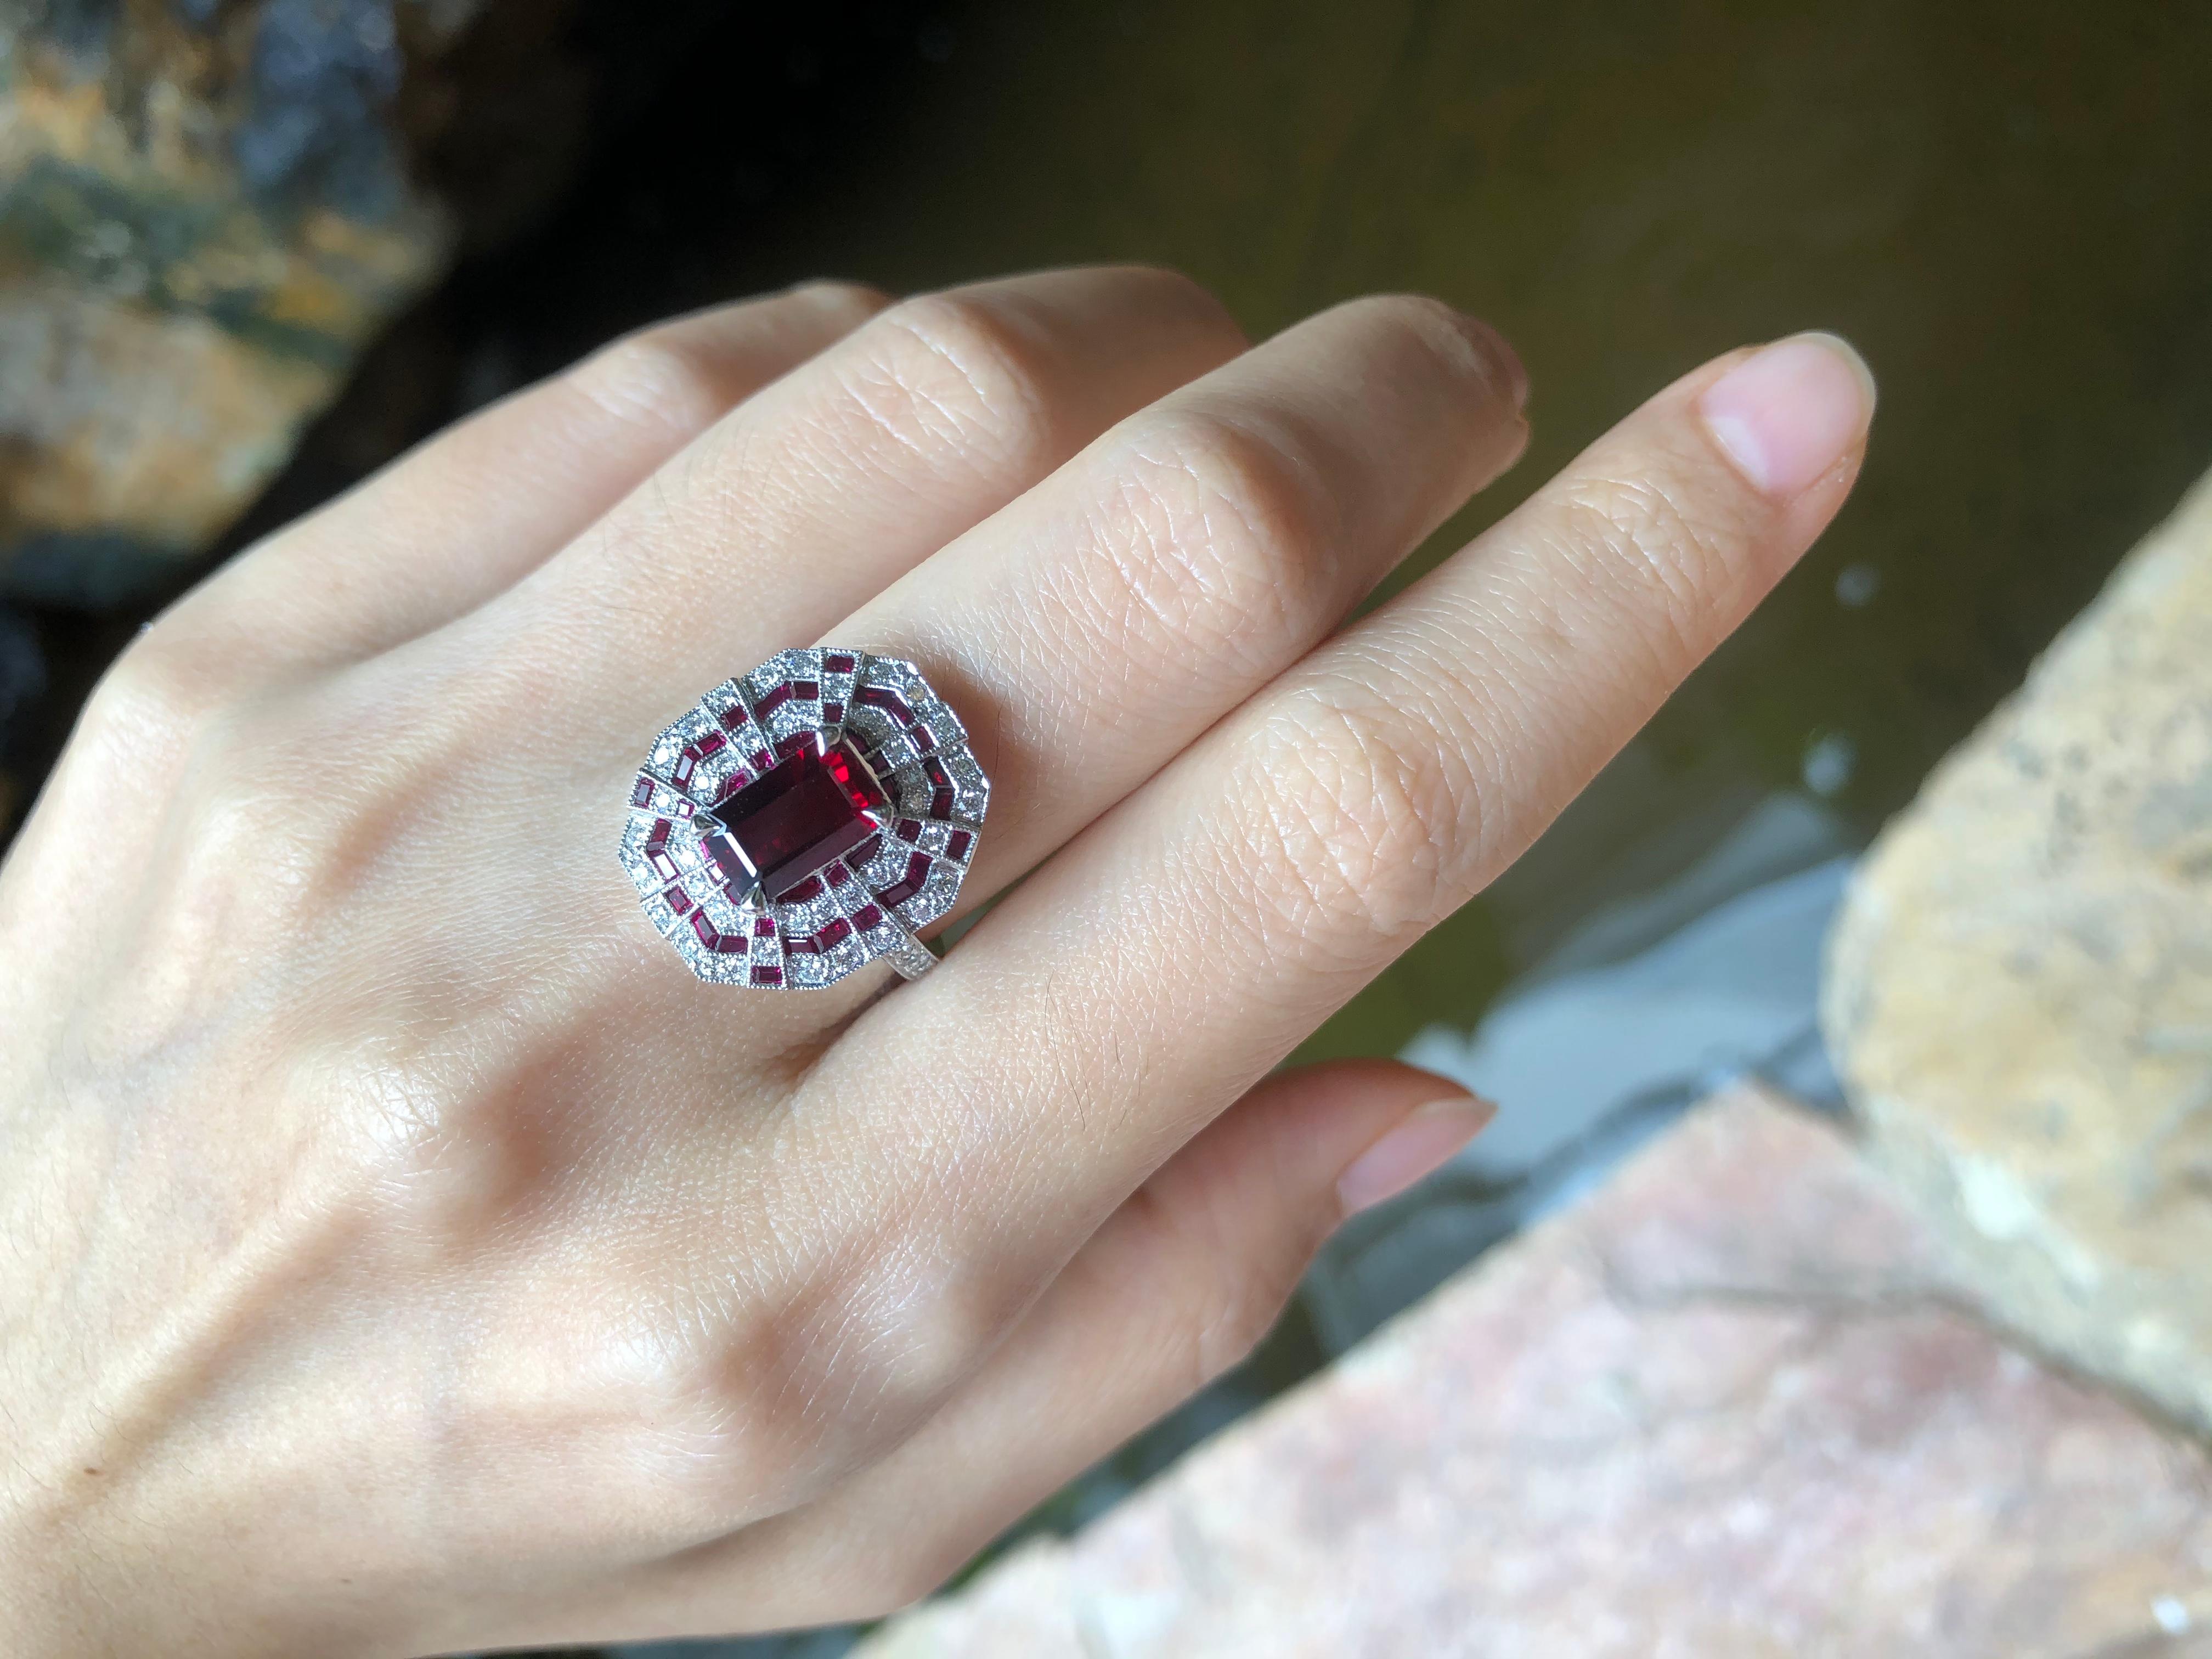 Ruby 2.02 carats with Ruby 1.18 carats and Diamond 0.49 carat Ring set in 18 Karat White Gold Settings

Width:  0.6 cm 
Length: 0.9 cm
Ring Size: 53
Total Weight: 8.14 grams

